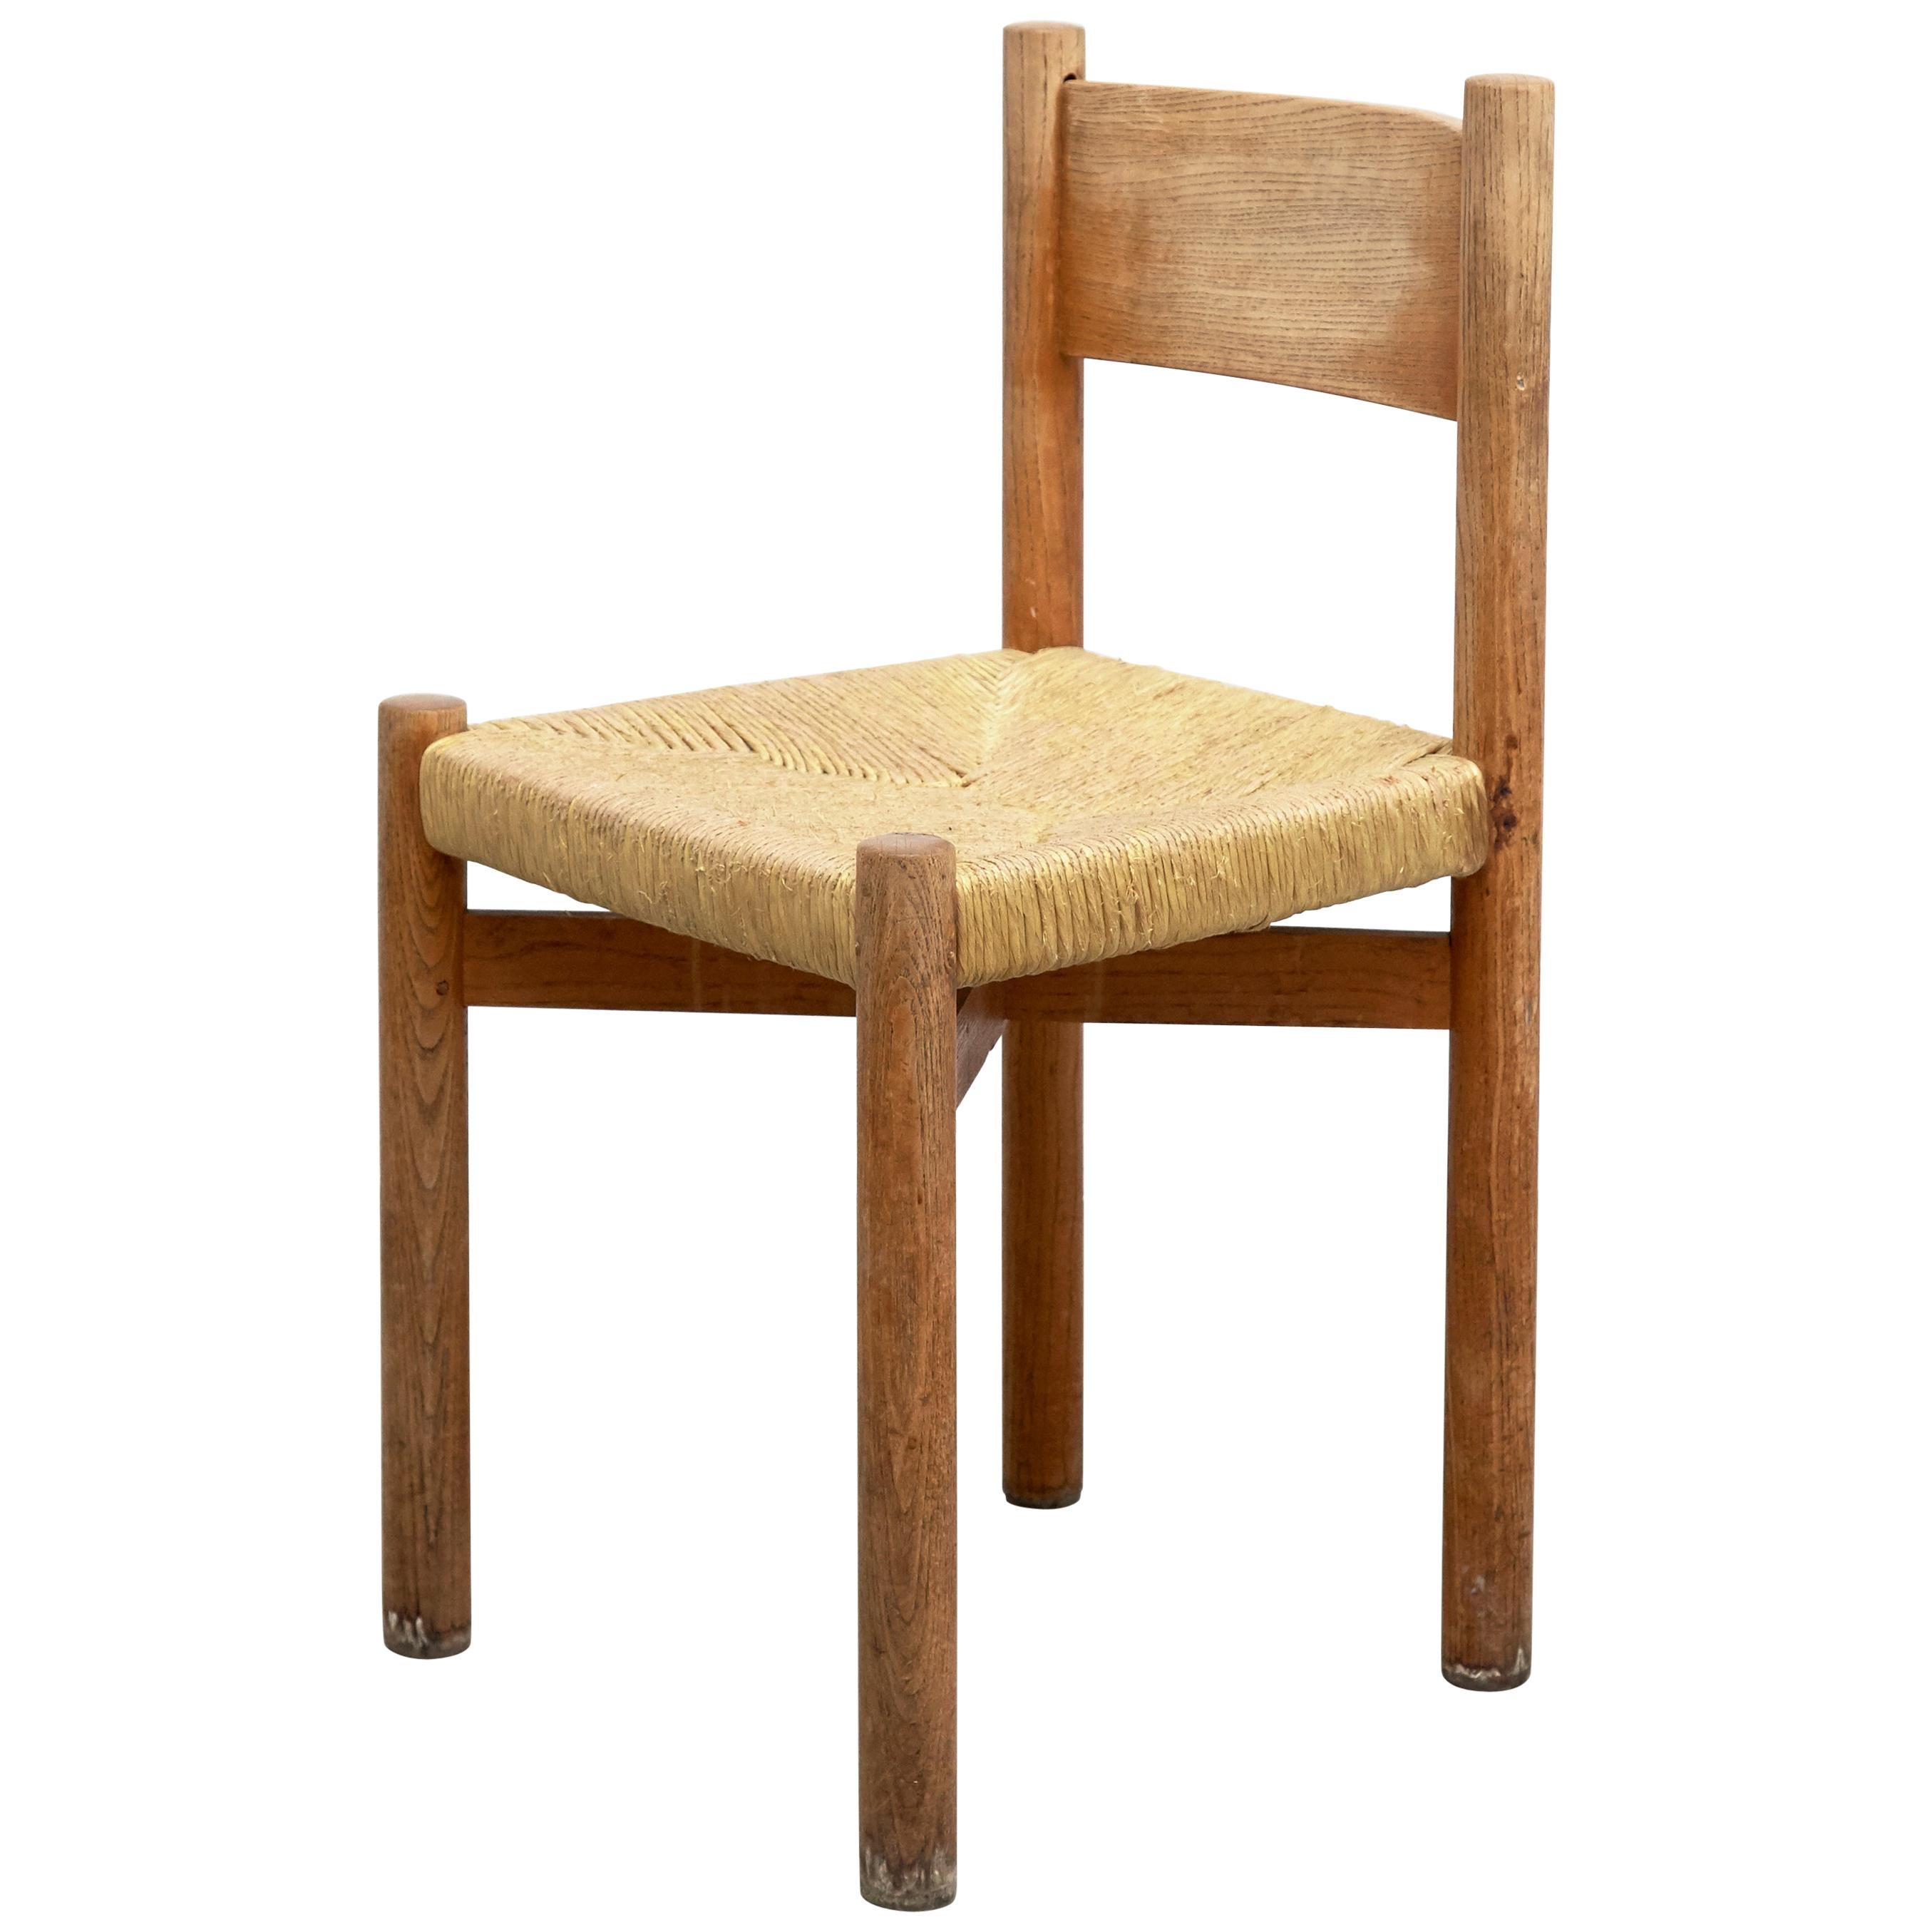 Chair model Meribel designed by Charlotte Perriand, circa 1950.
Manufactured in France.

Wood and rattan.

In original condition, with minor wear consistent with age
and use, preserving a beautiful patina.

Charlotte Perriand (1903-1999) She